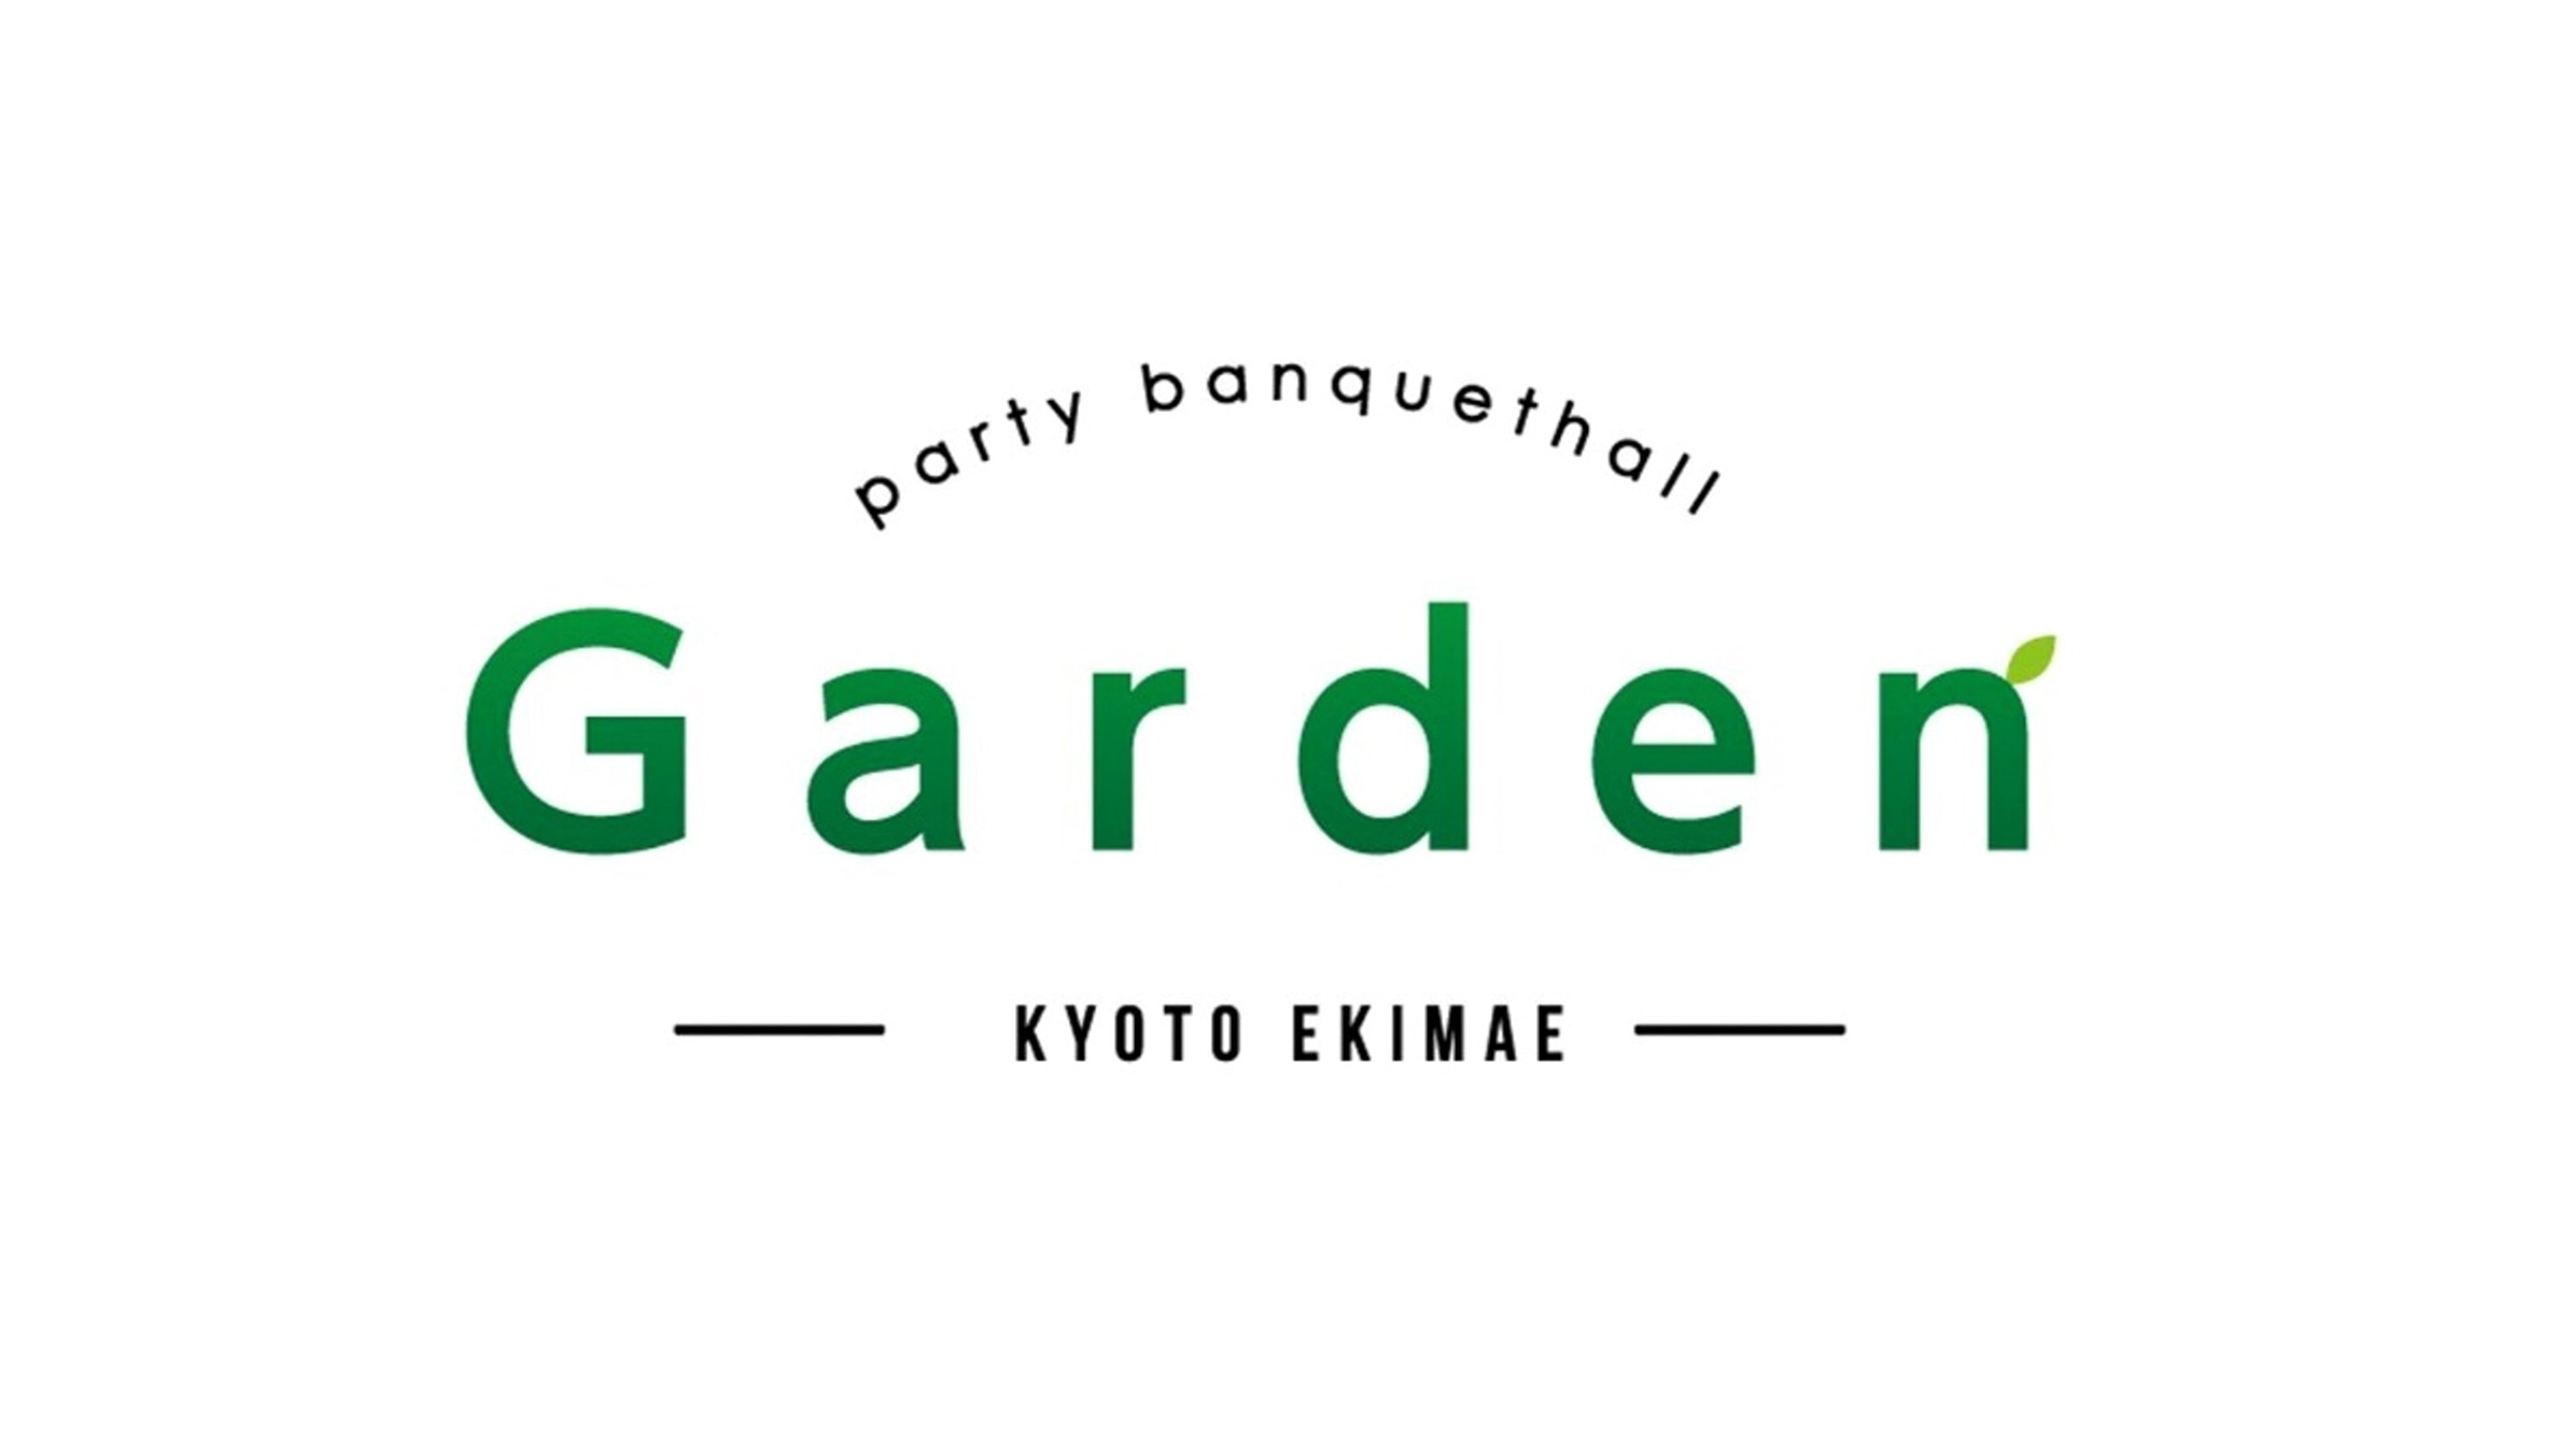 [party banquethall Garden -ガーデン-]：地下1階